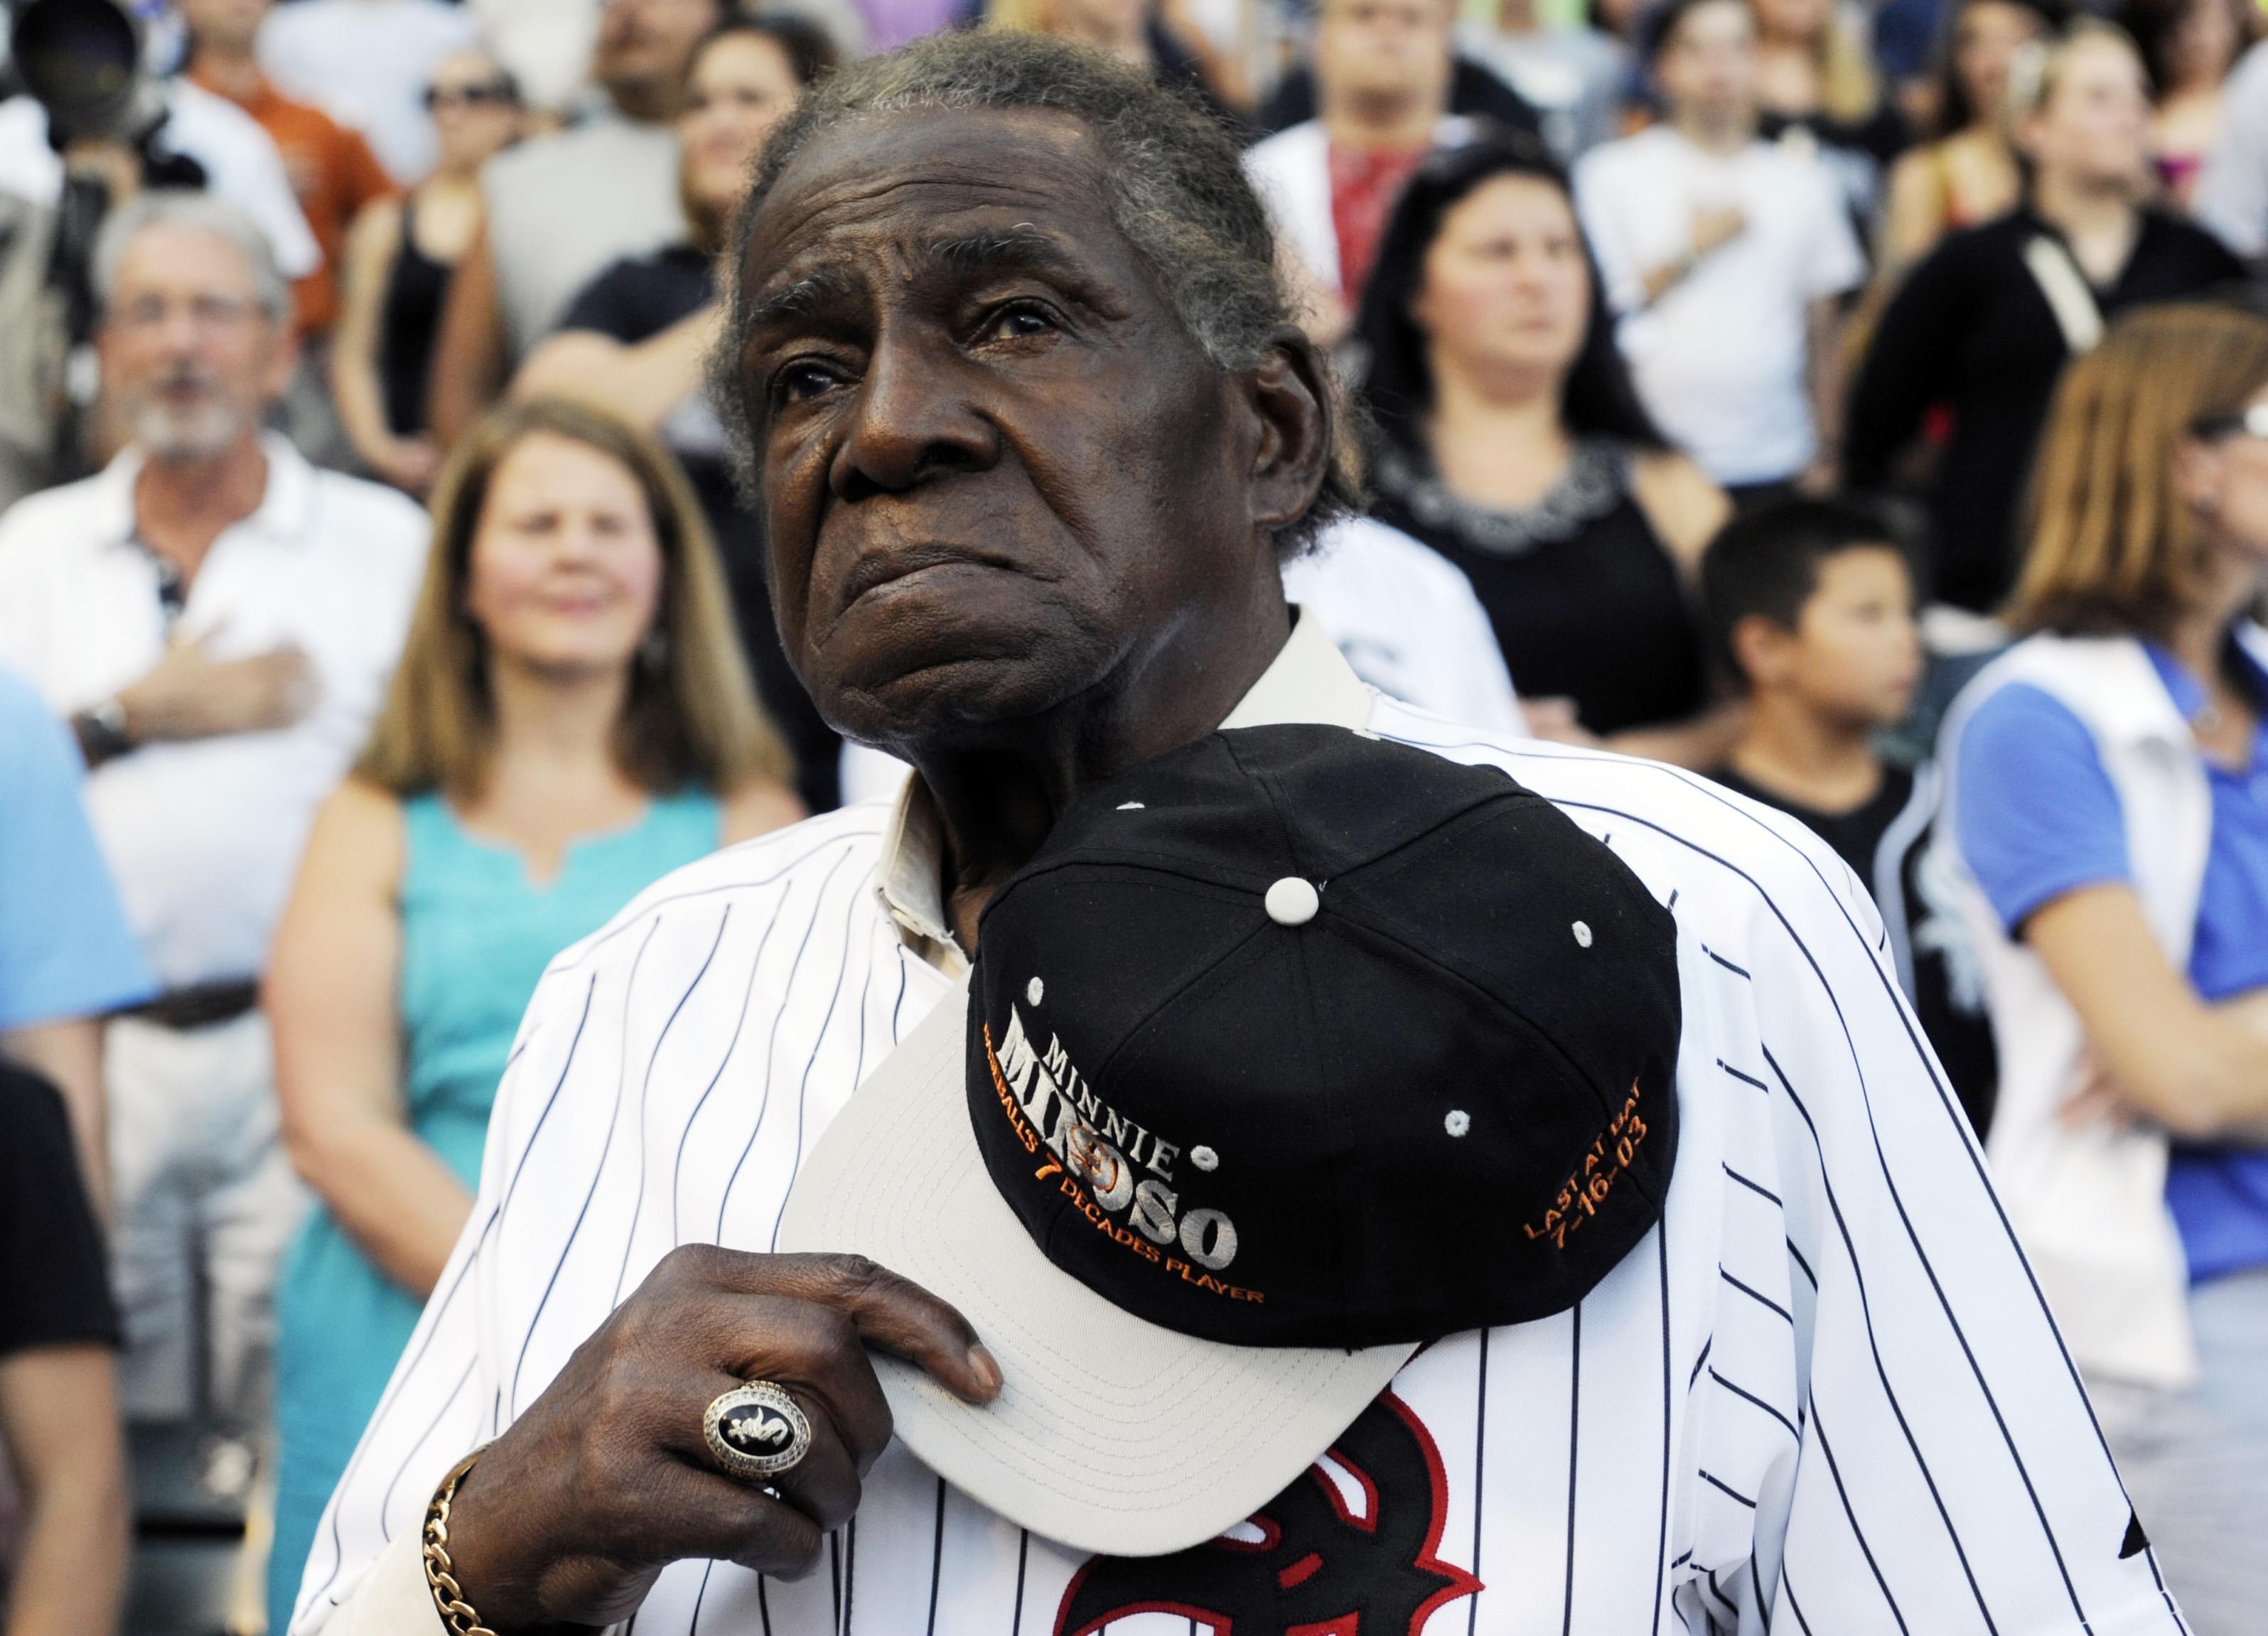 Former Negro Leaguer and Chicago White Sox player Minnie Minoso stands during the national anthem before a baseball game between the Chicago White Sox and the Texas Rangers in August 2013.